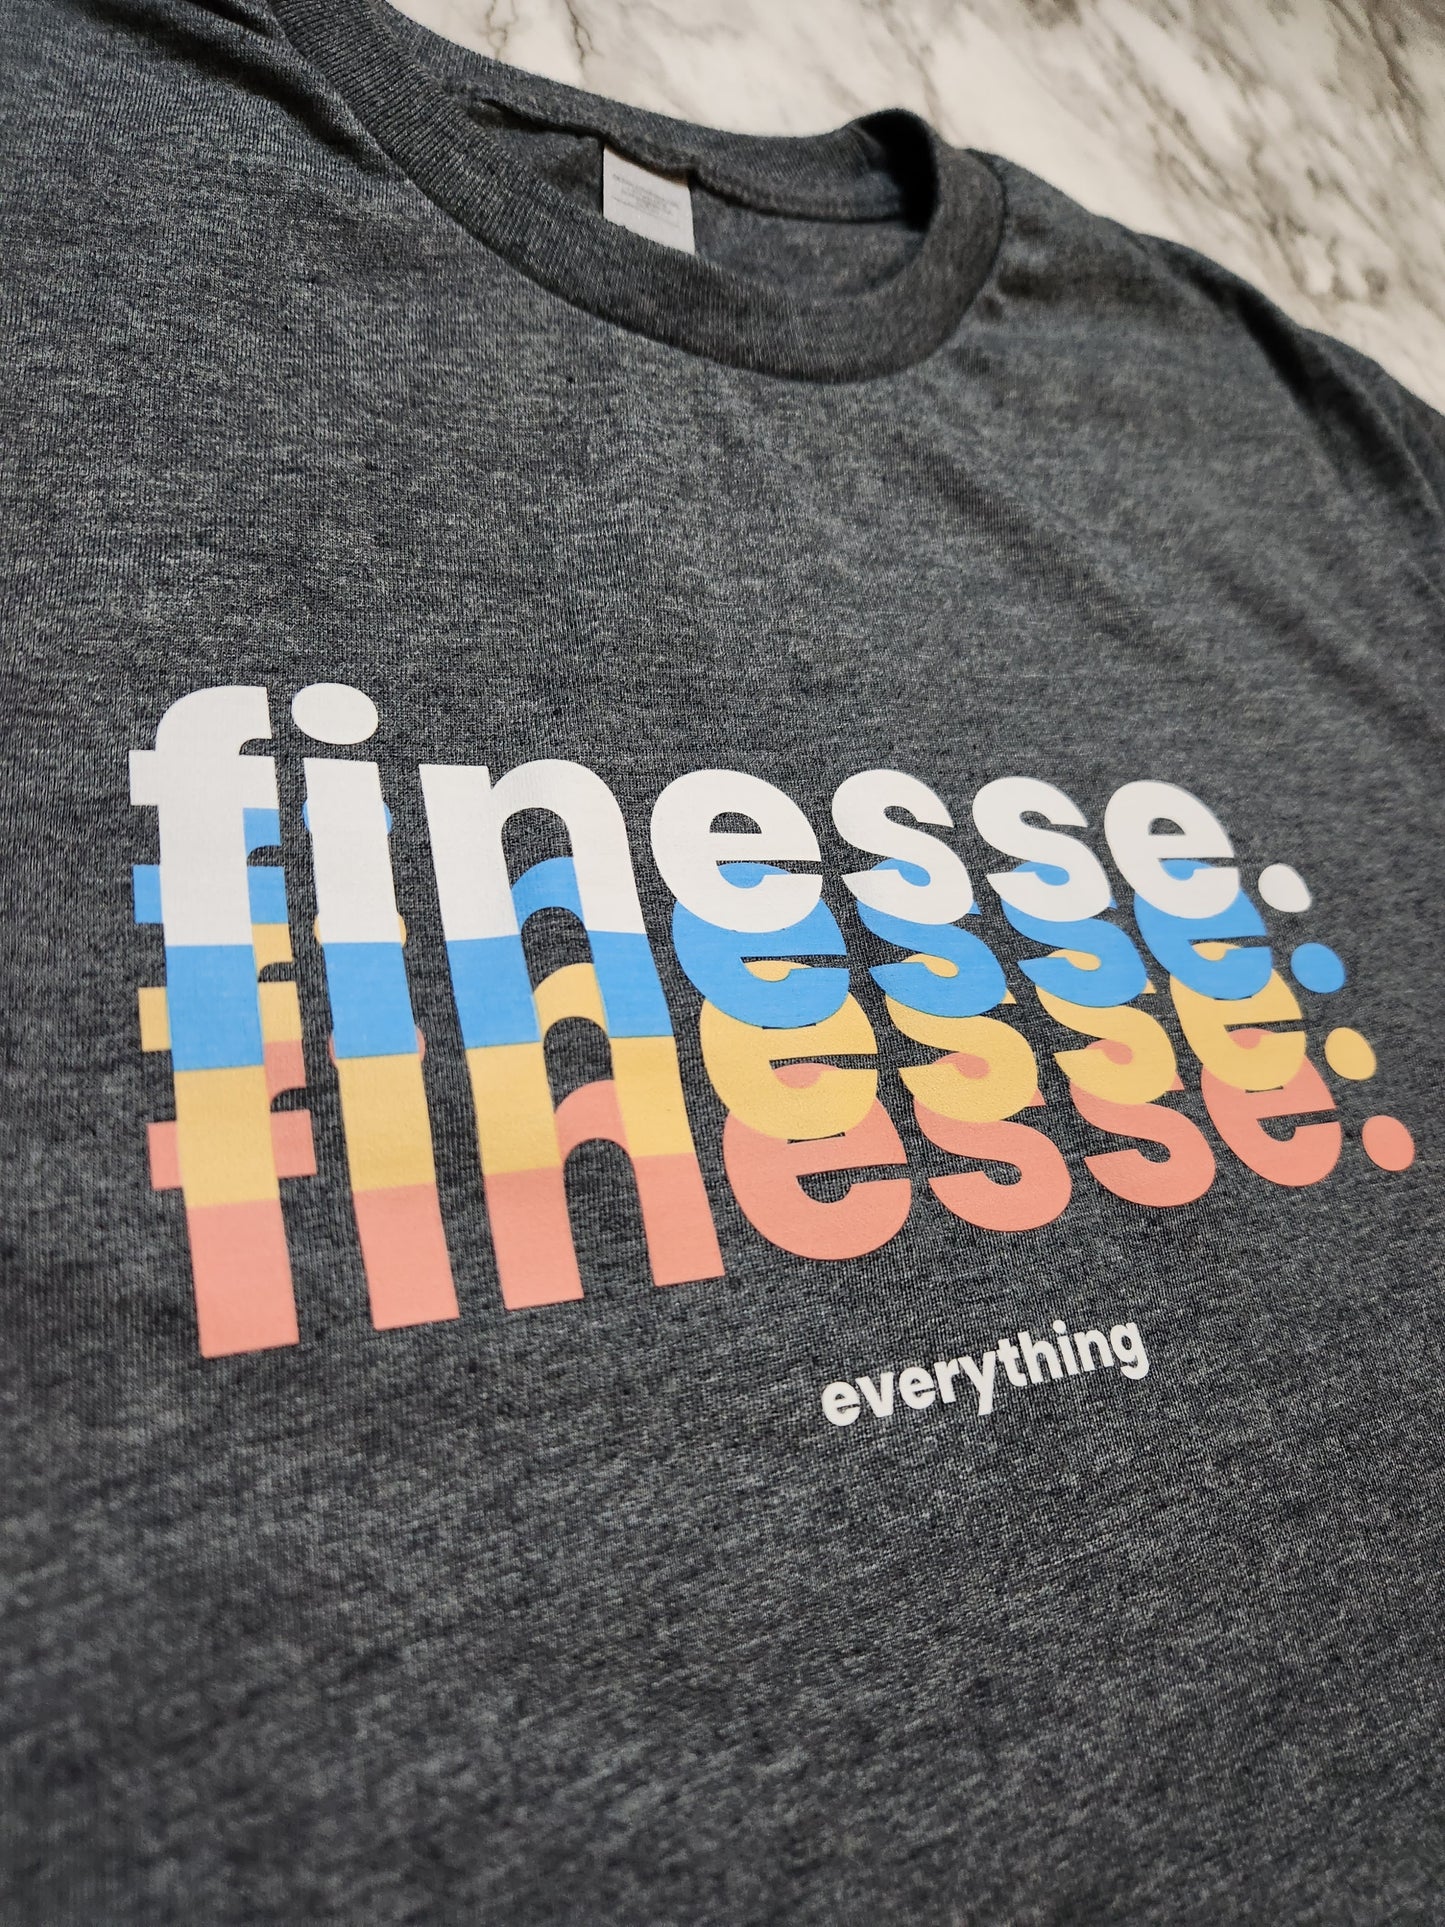 finesse everything T-Shirt (Metal)